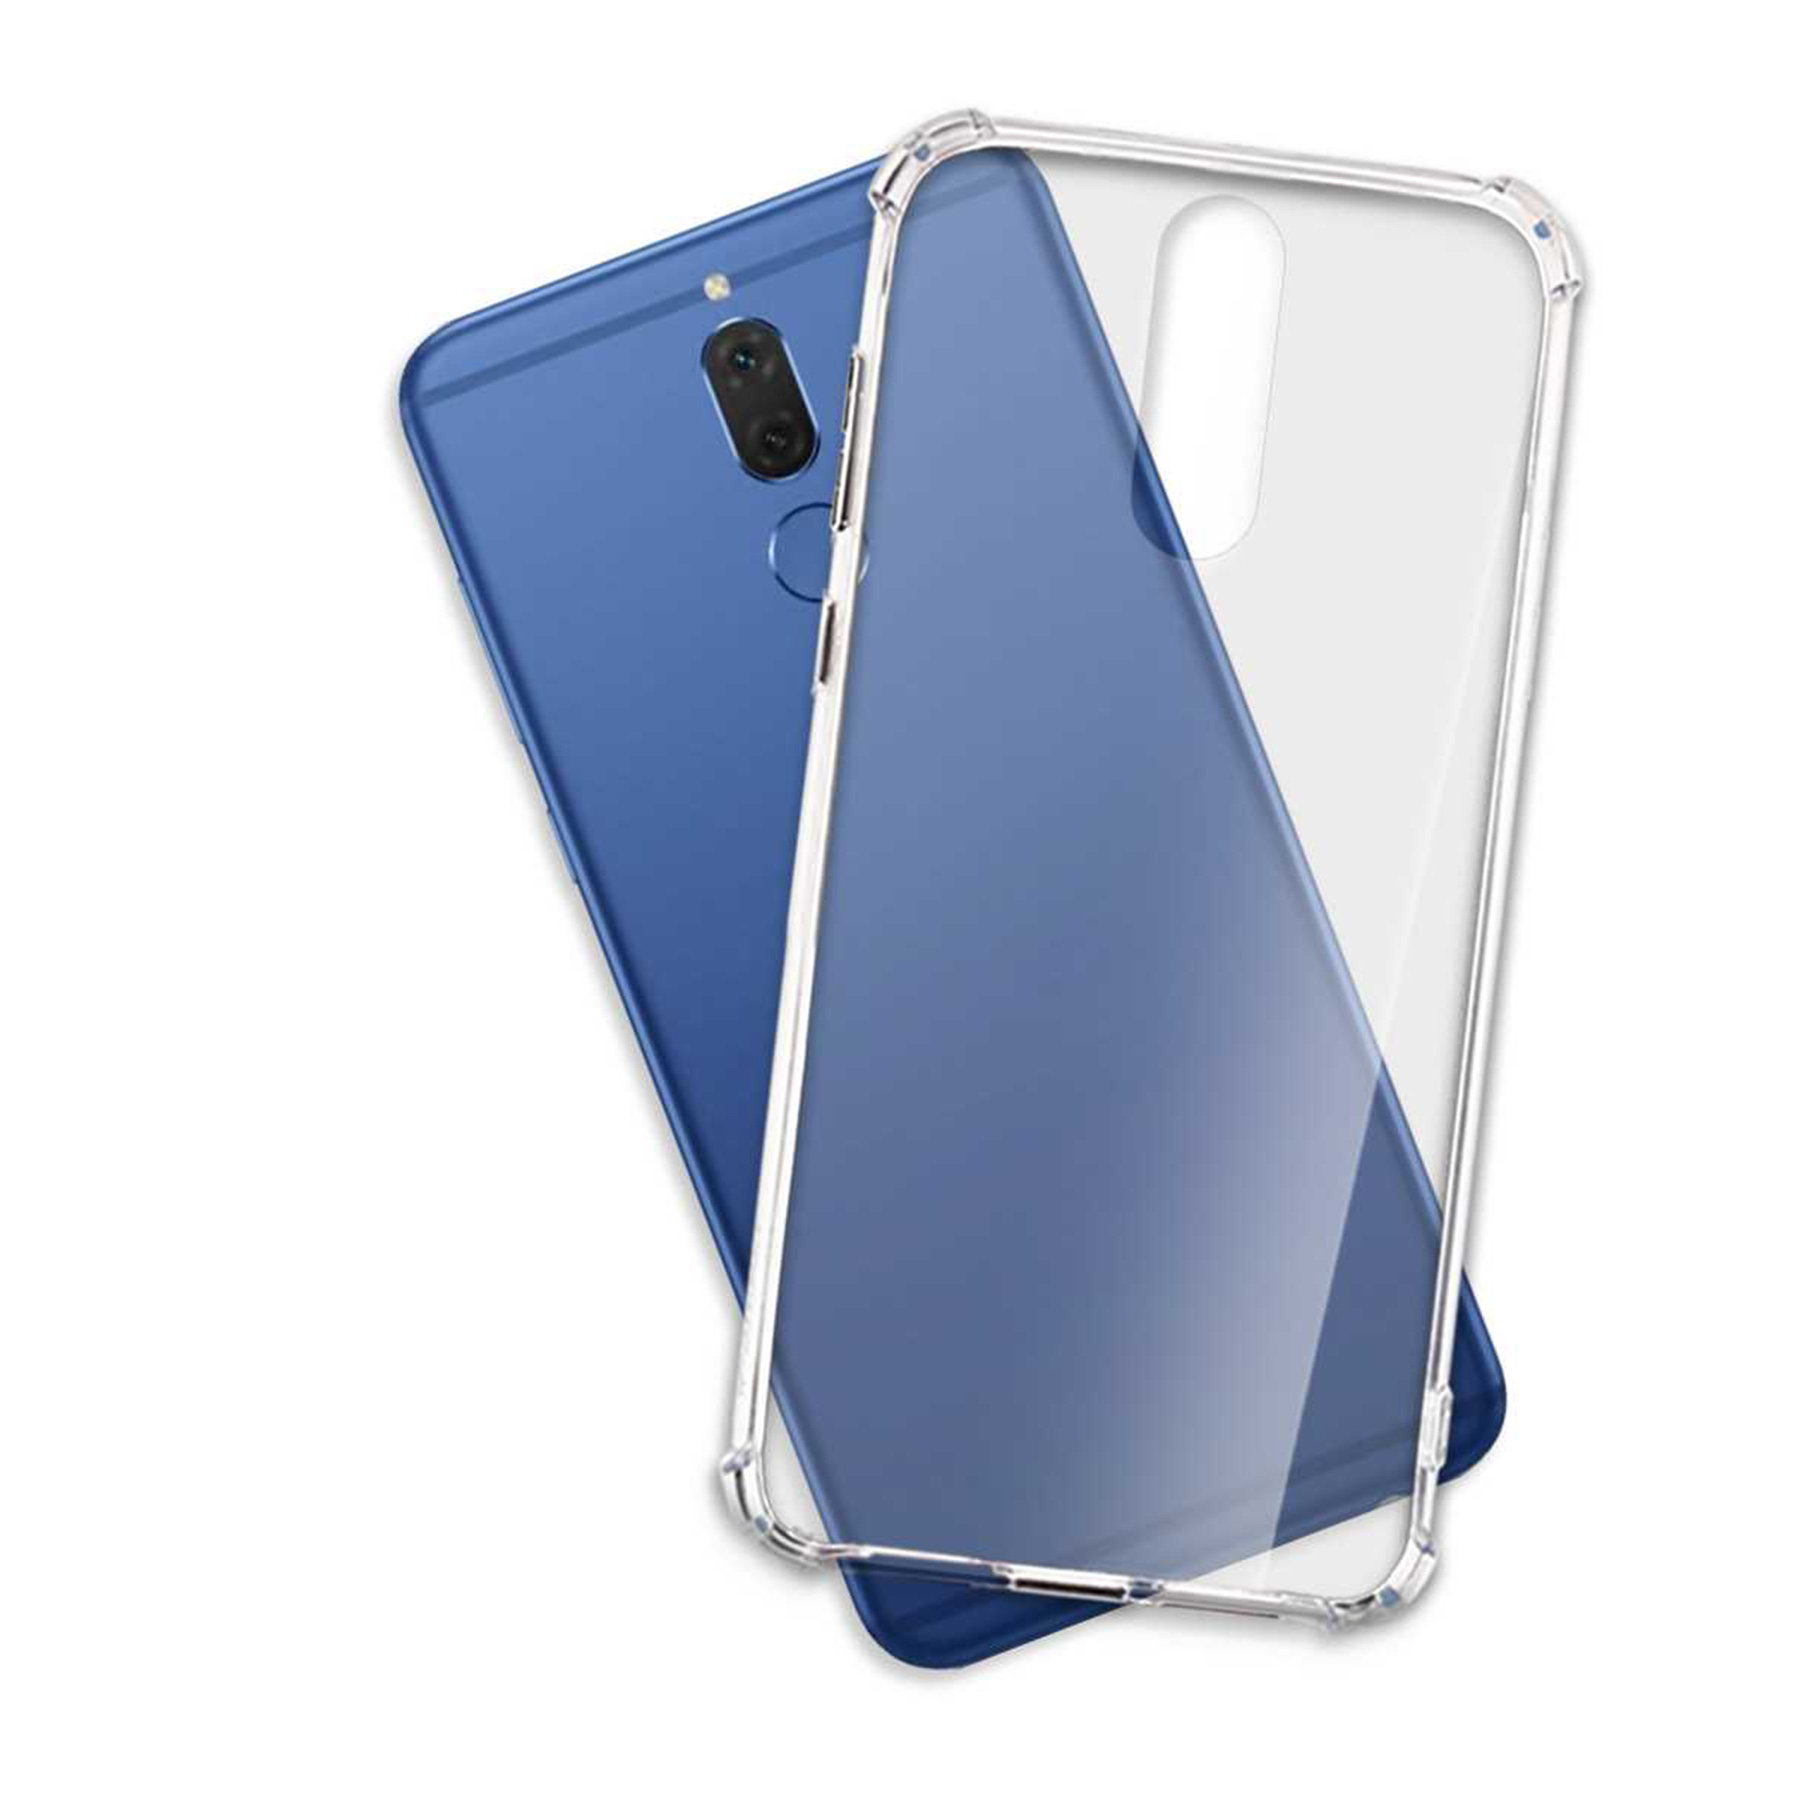 MTB MORE ENERGY Clear Case, Backcover, Mate 10 Huawei, Lite, Armor Transparent